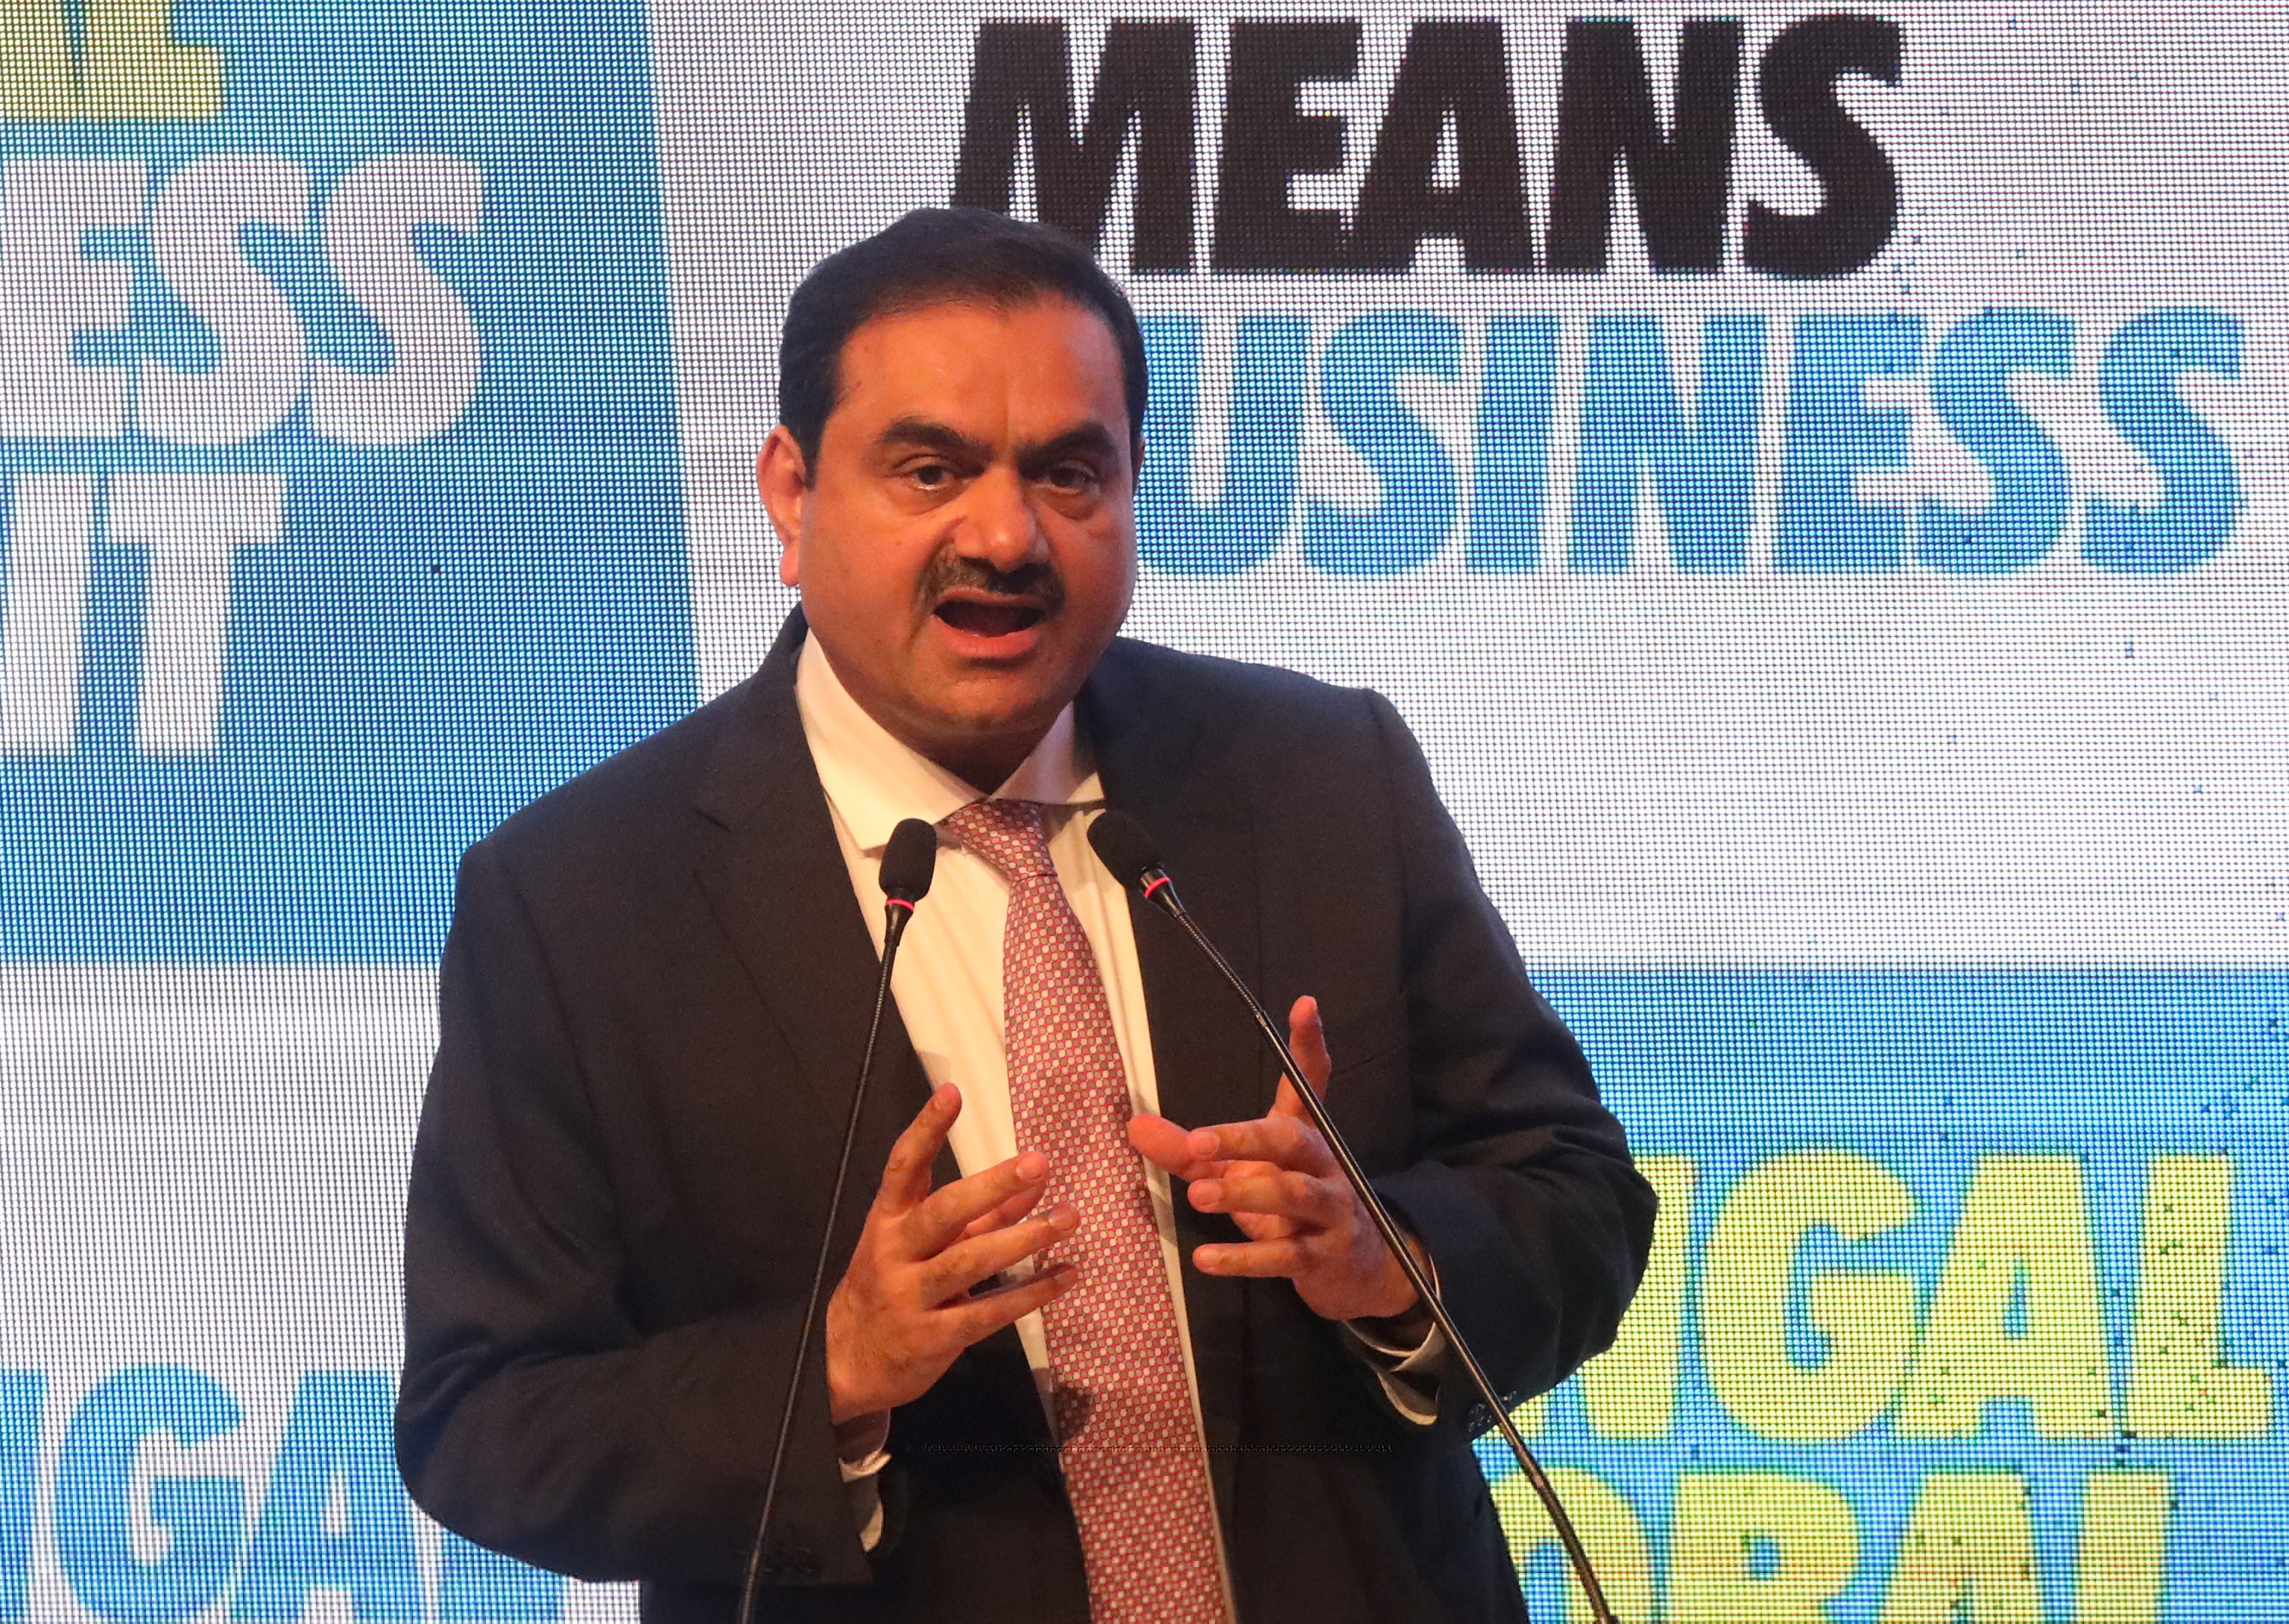 How Gautam Adani is helping Modi govt with India's foreign policy